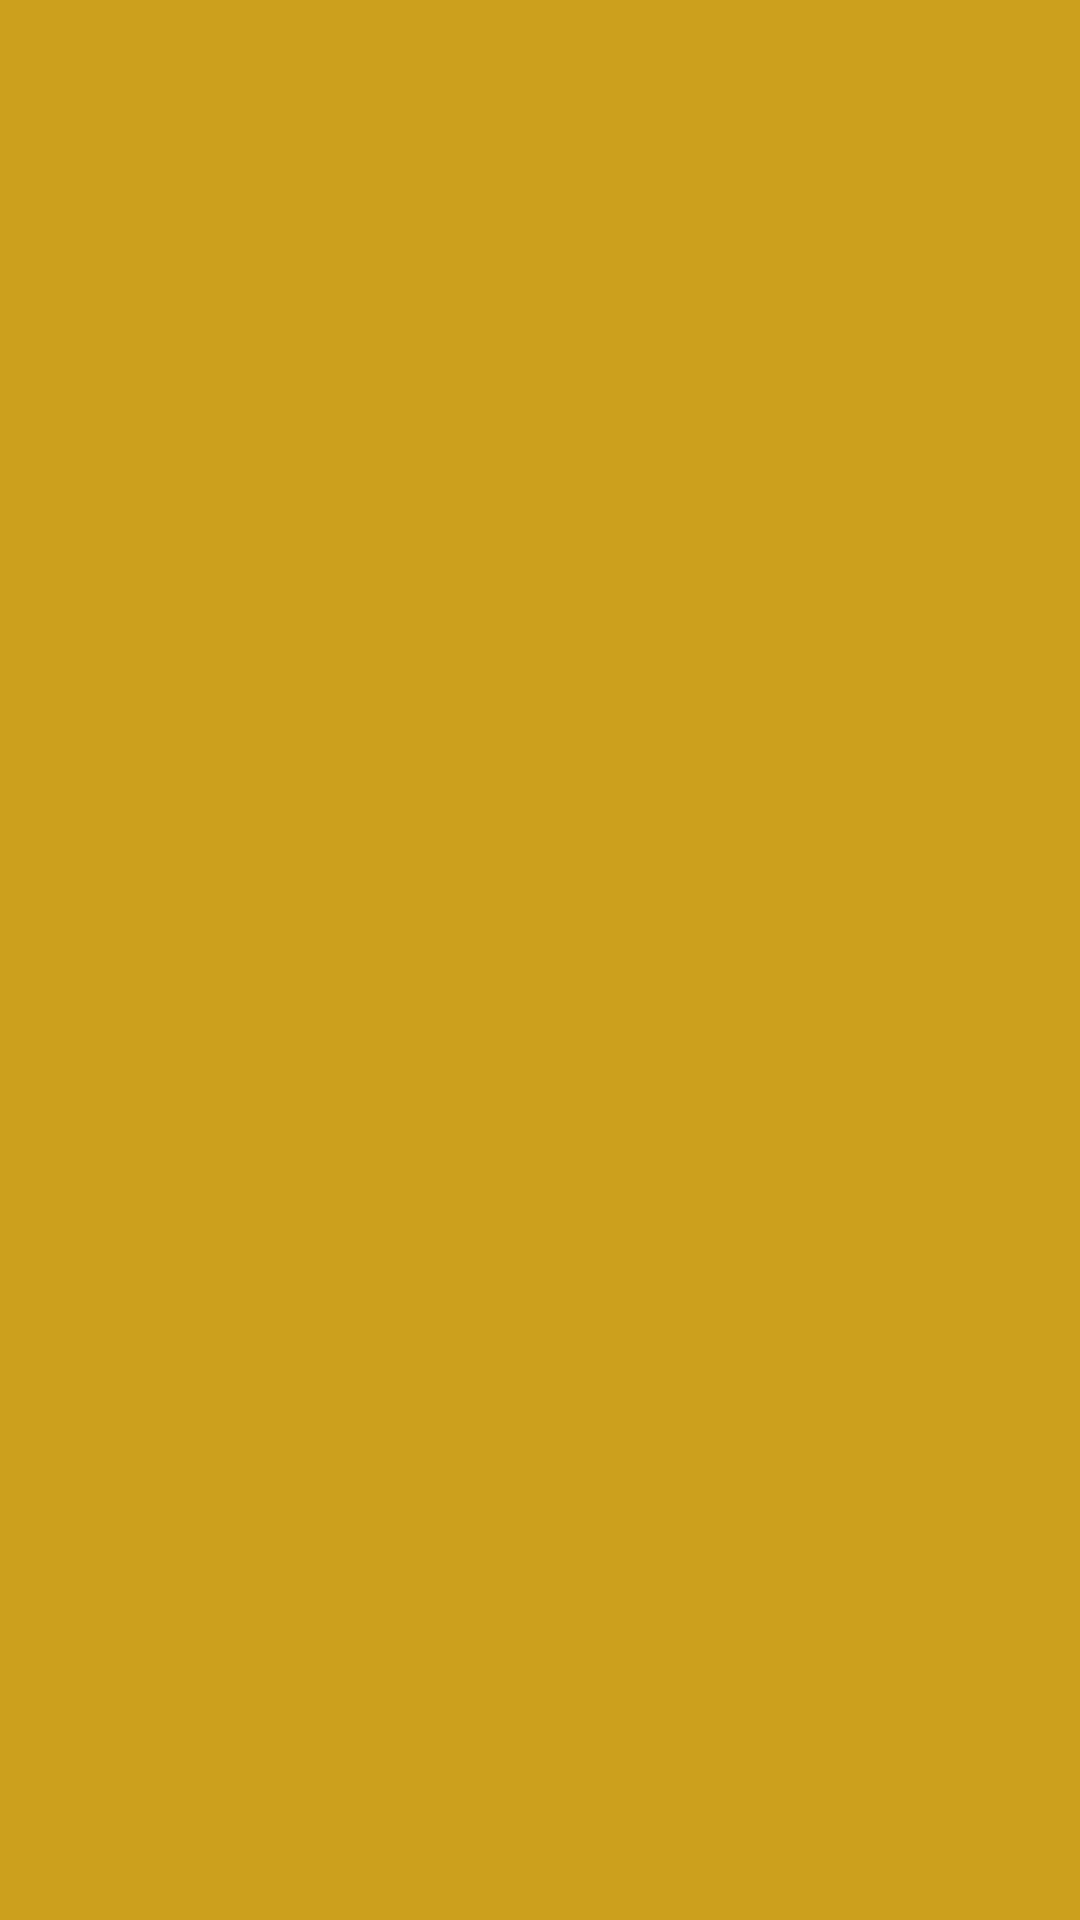 1080x1920 Lemon Curry Solid Color Background